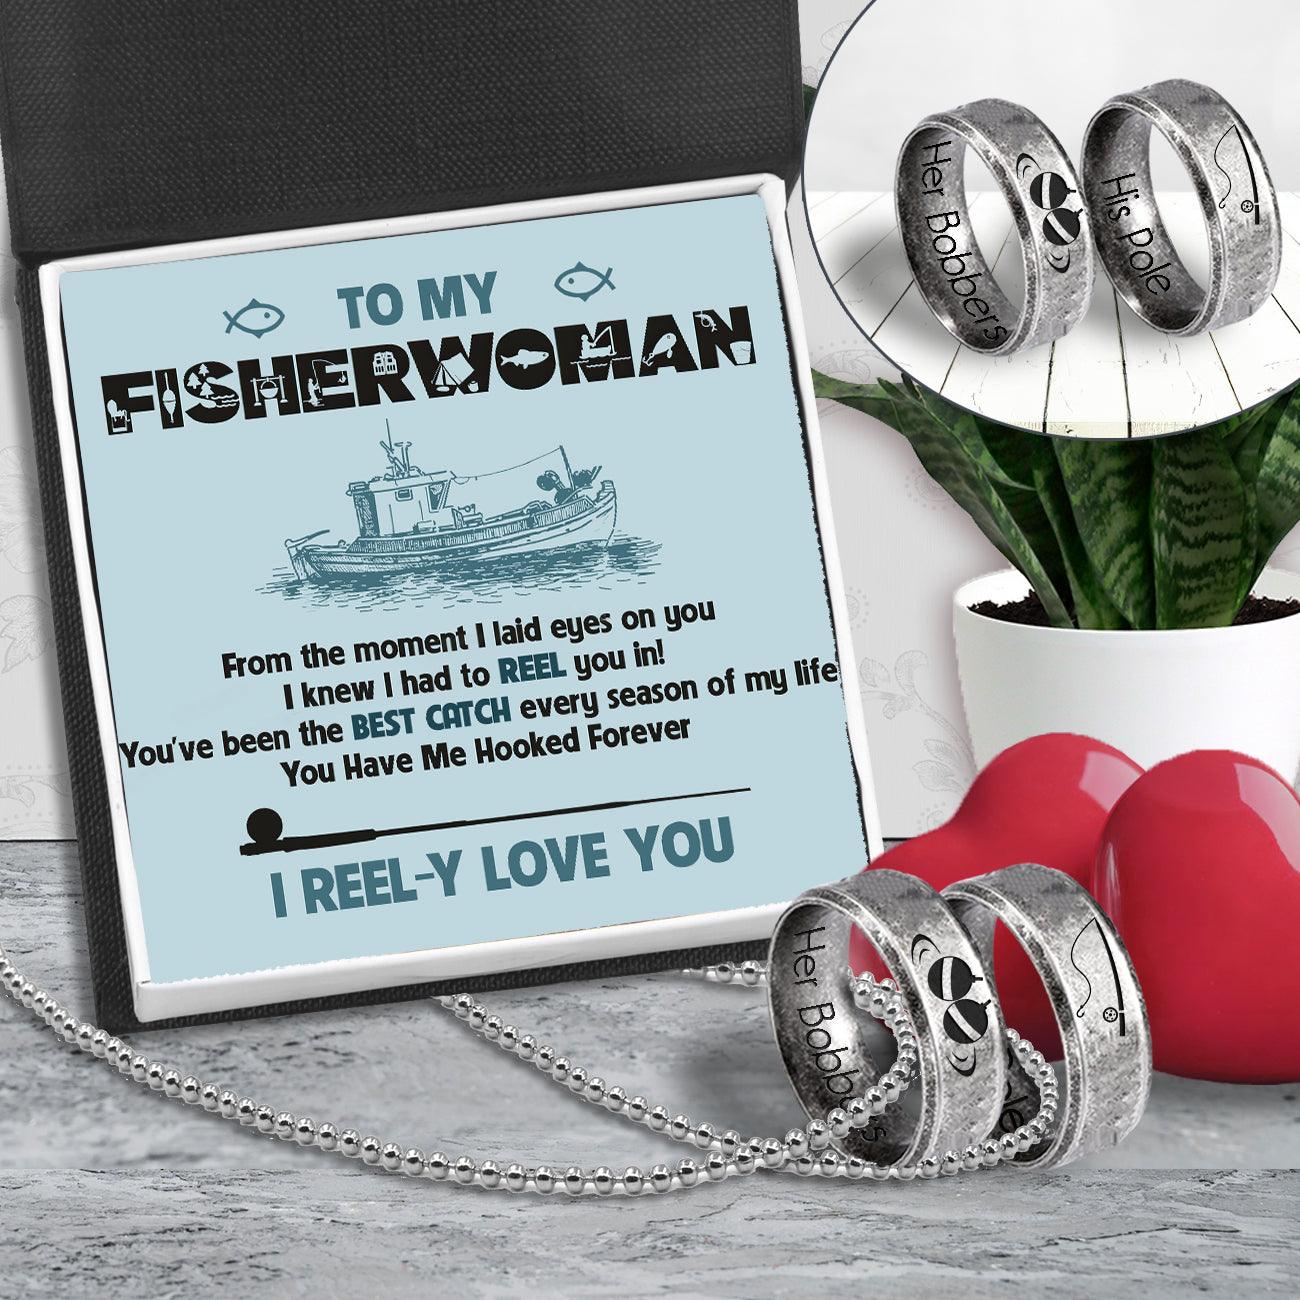 Fishing Ring Couple Necklaces - Fishing - To My Fisherwoman - You've Been The Best Catch Every Season Of My Life - Augndx13007 - Gifts Holder